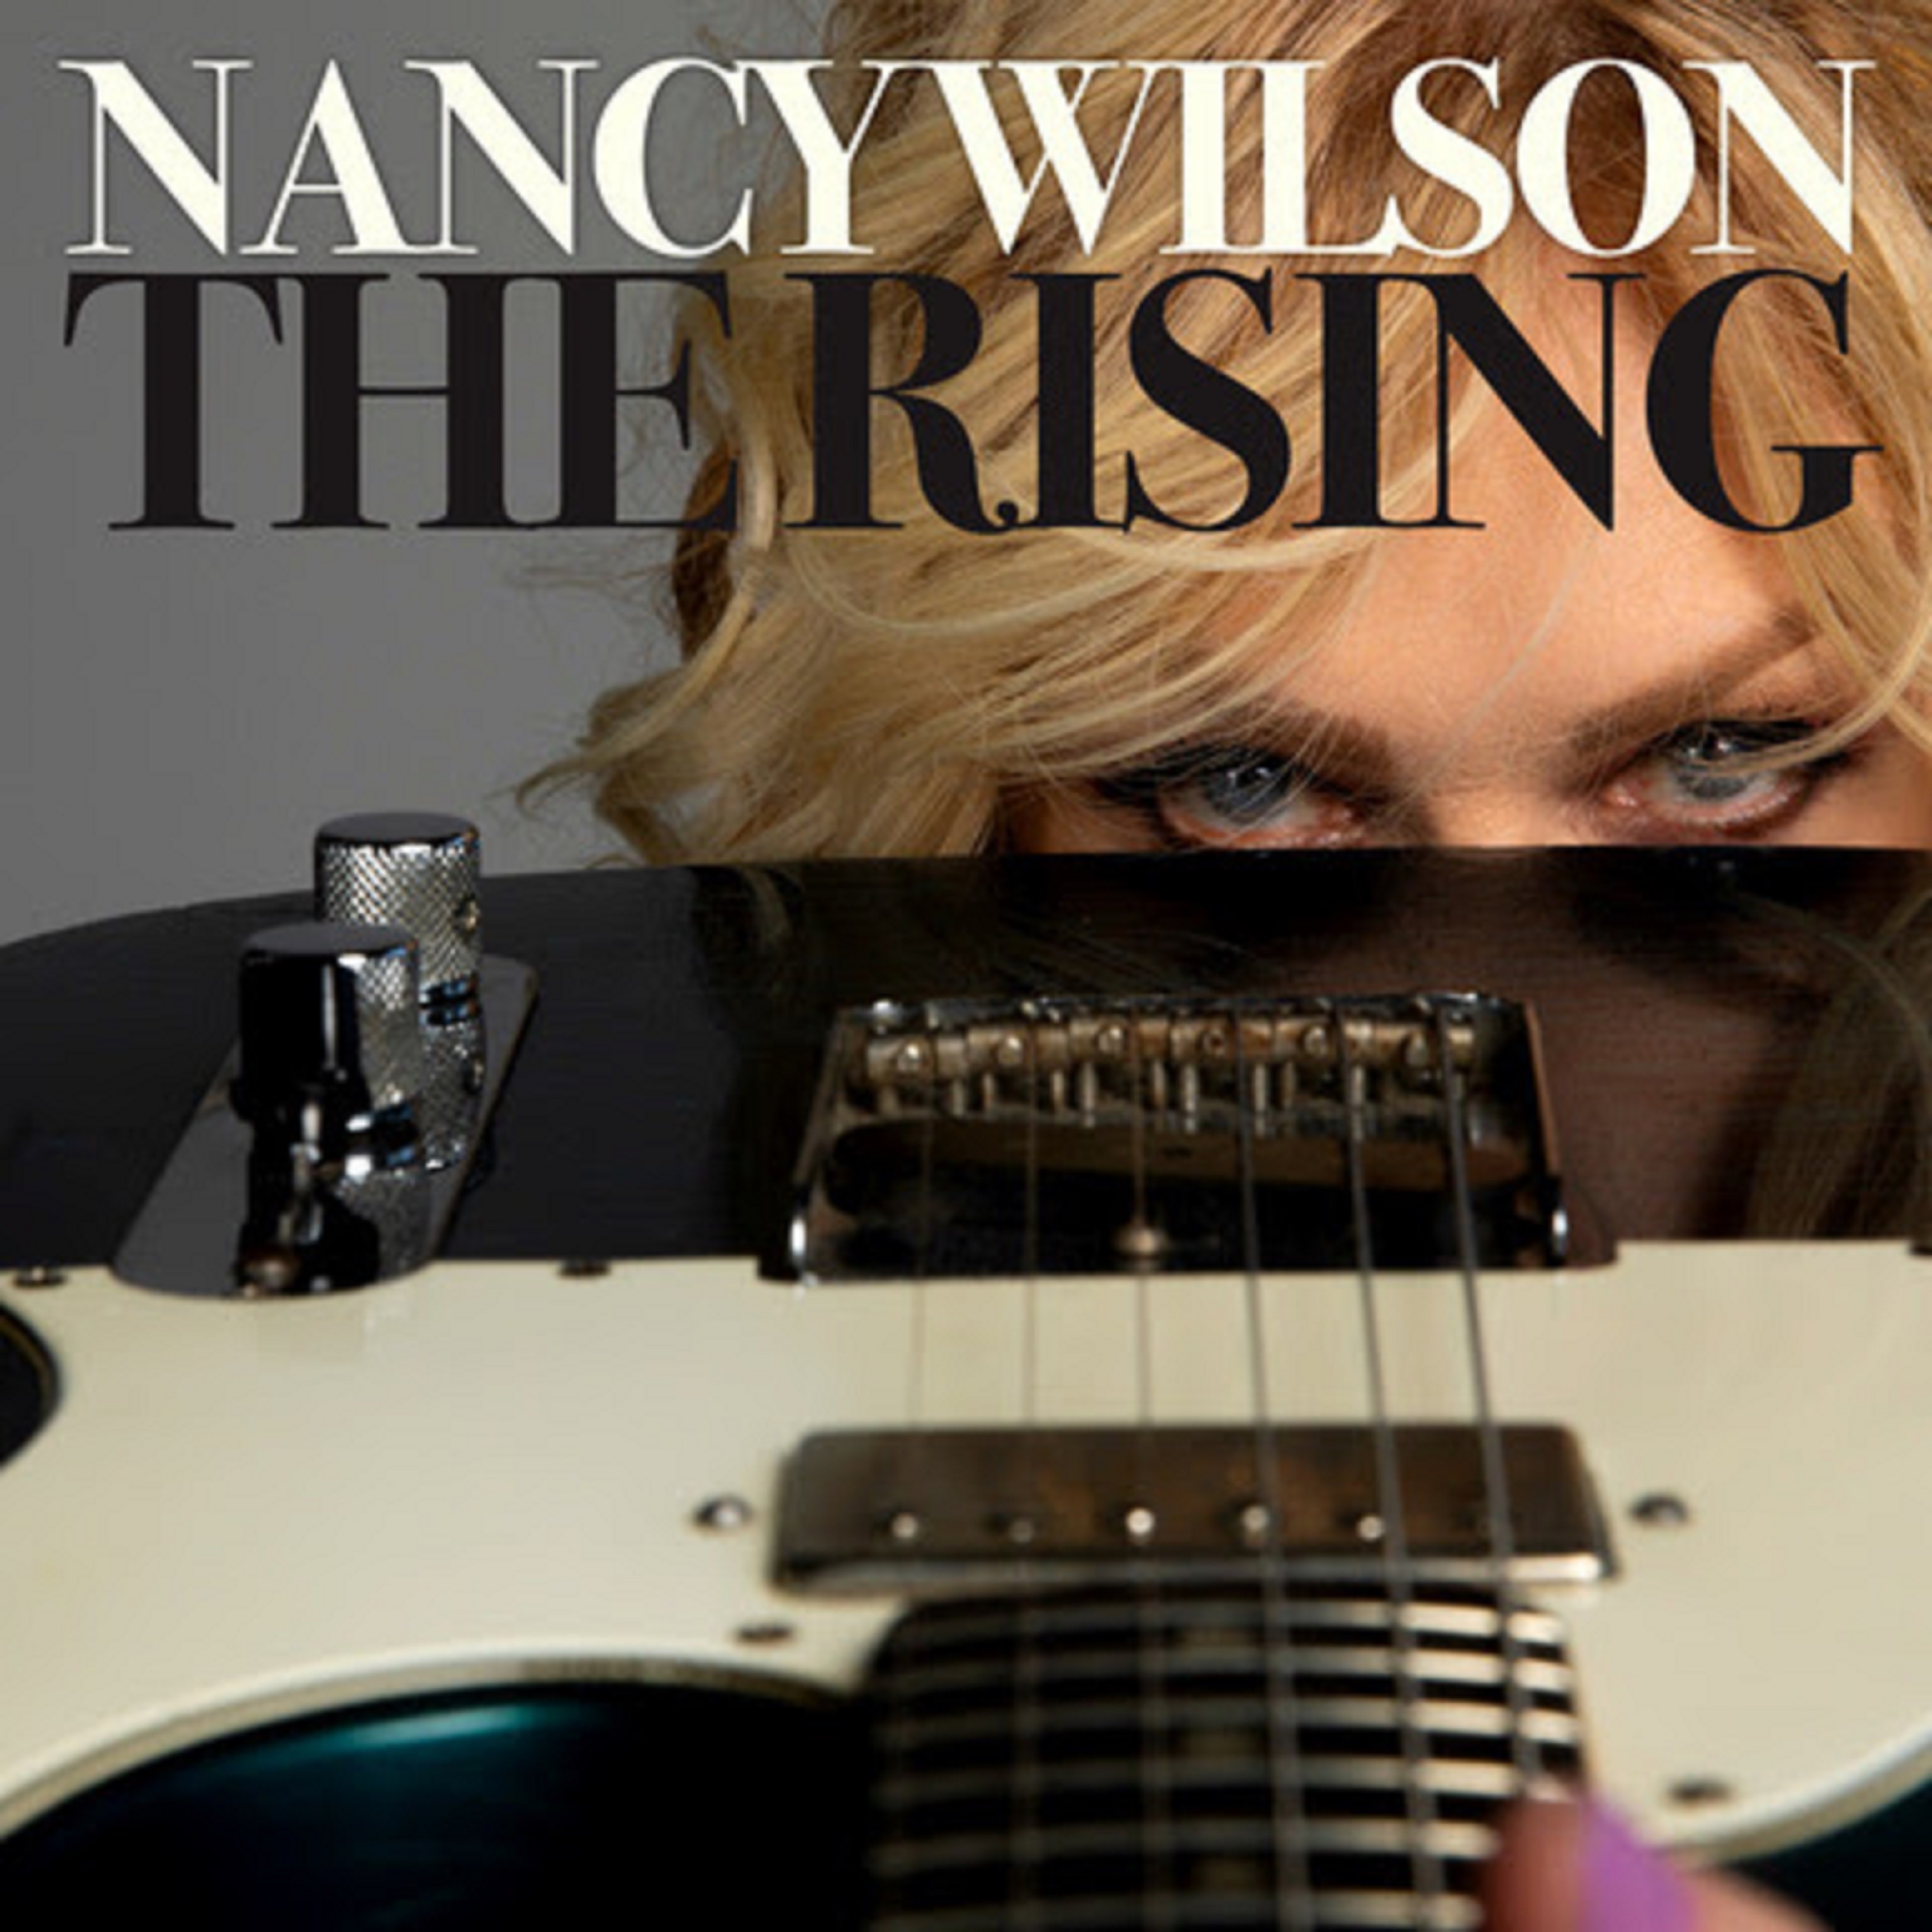 Nancy Wilson Releases Cover of Bruce Springsteen's "The Rising"